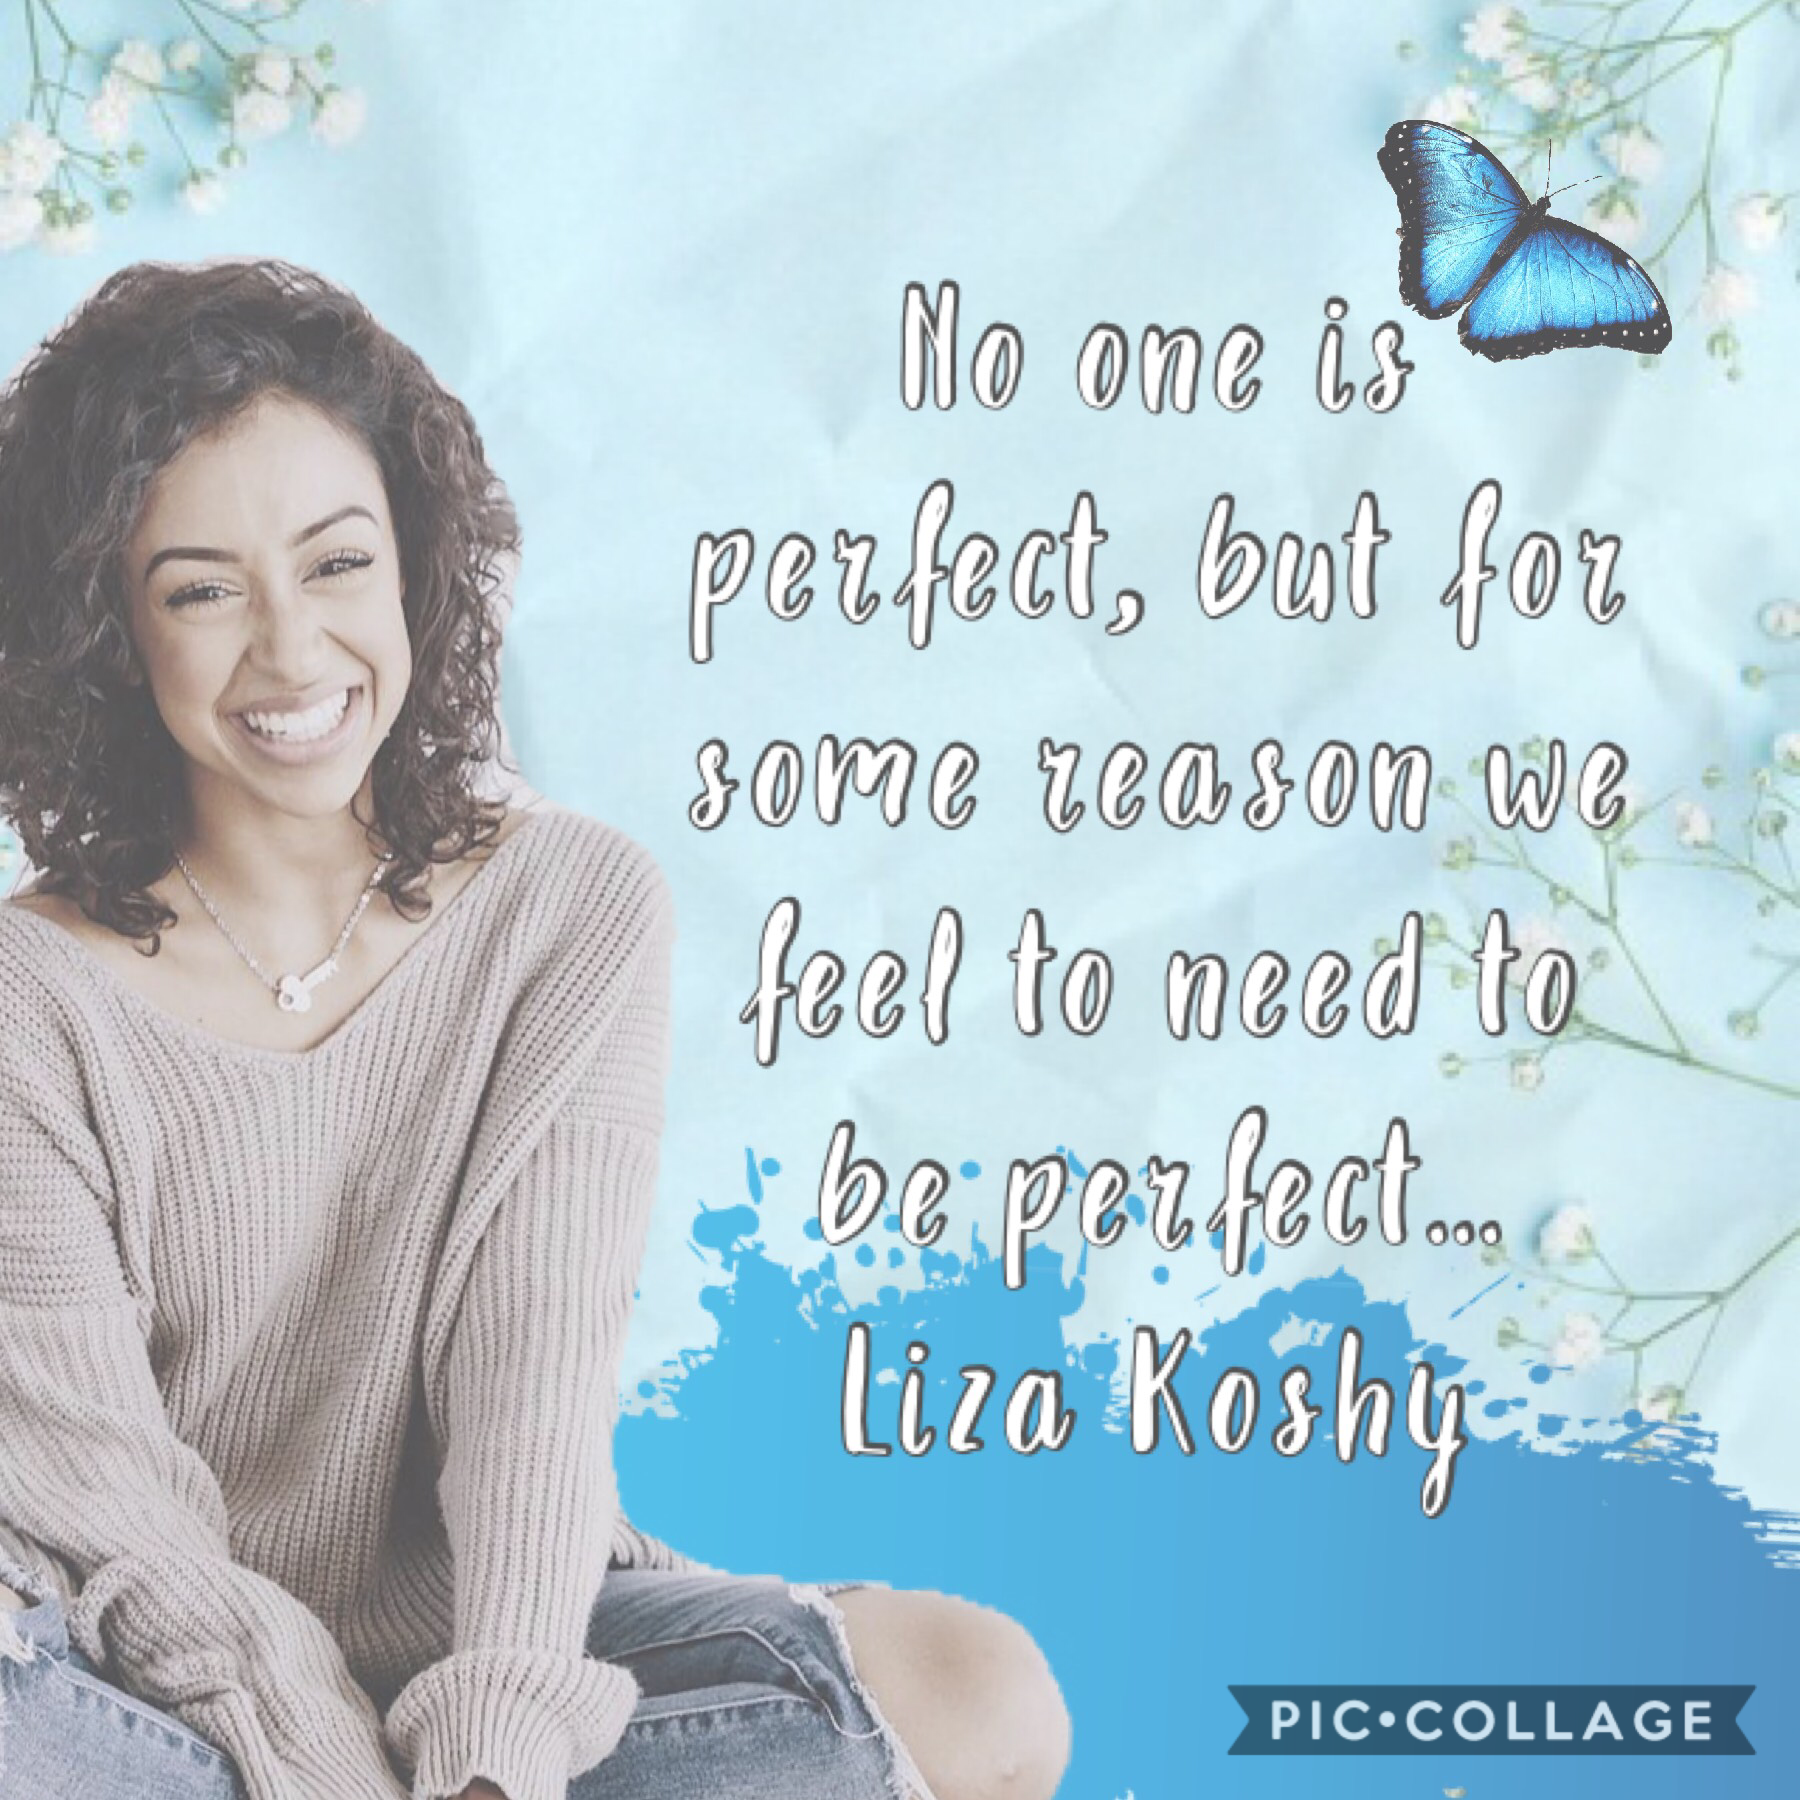 Liza Koshy is a big role model for me,as well as being hilarious Liza is happy to support others that are going through a bad time.